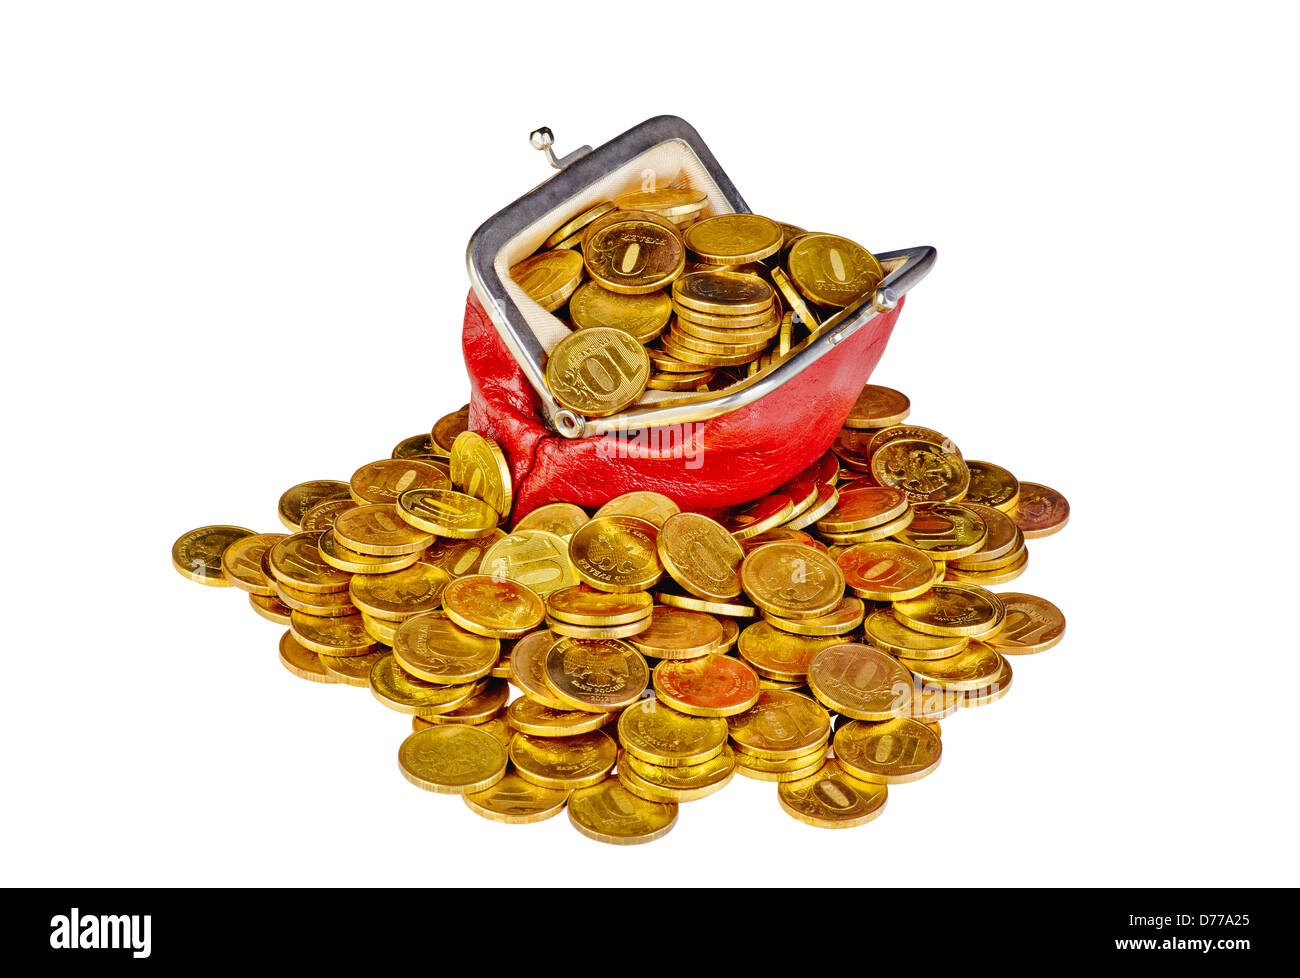 Old red purse with golden coins isolated on white background Stock Photo